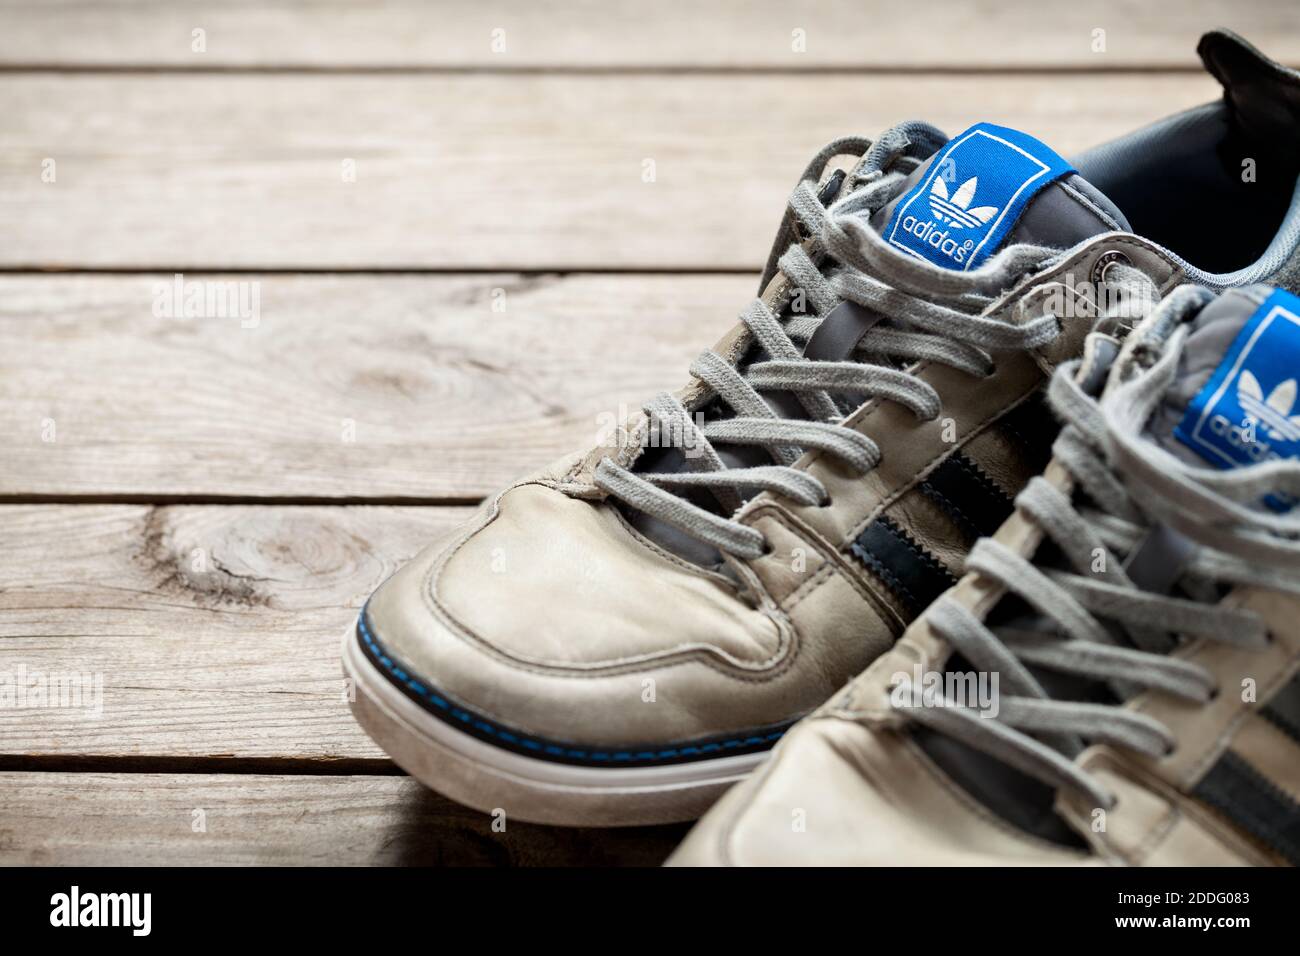 Adidas Shoe High Resolution Stock Photography and Images - Alamy